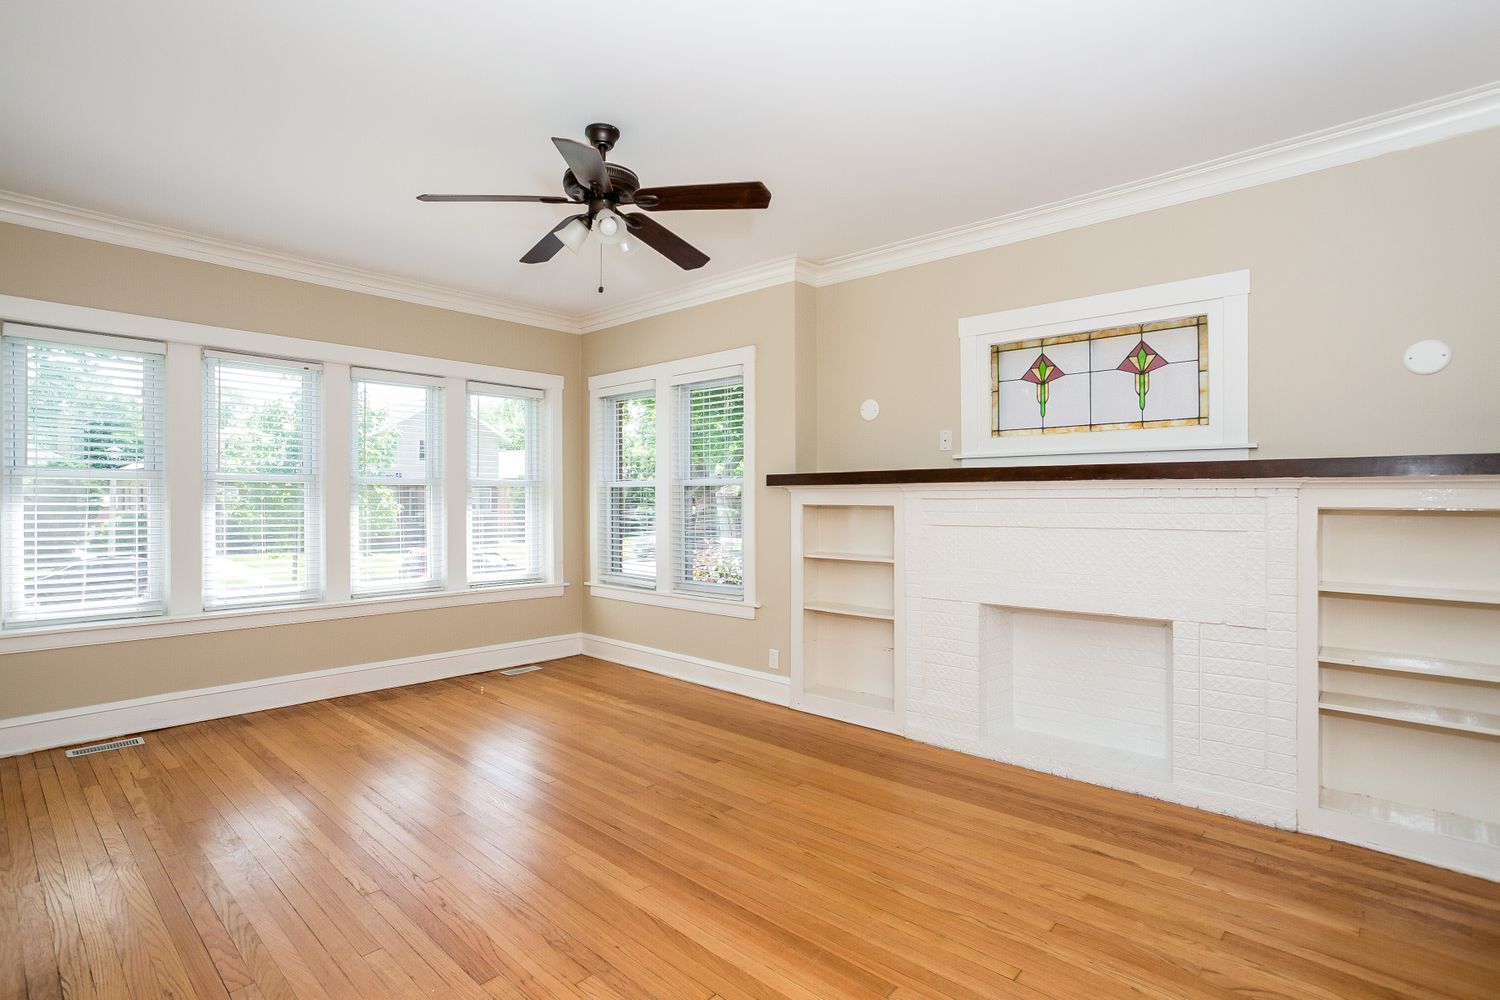 Gorgeous living space with hardwood flooring at Invitation Homes Chicago.